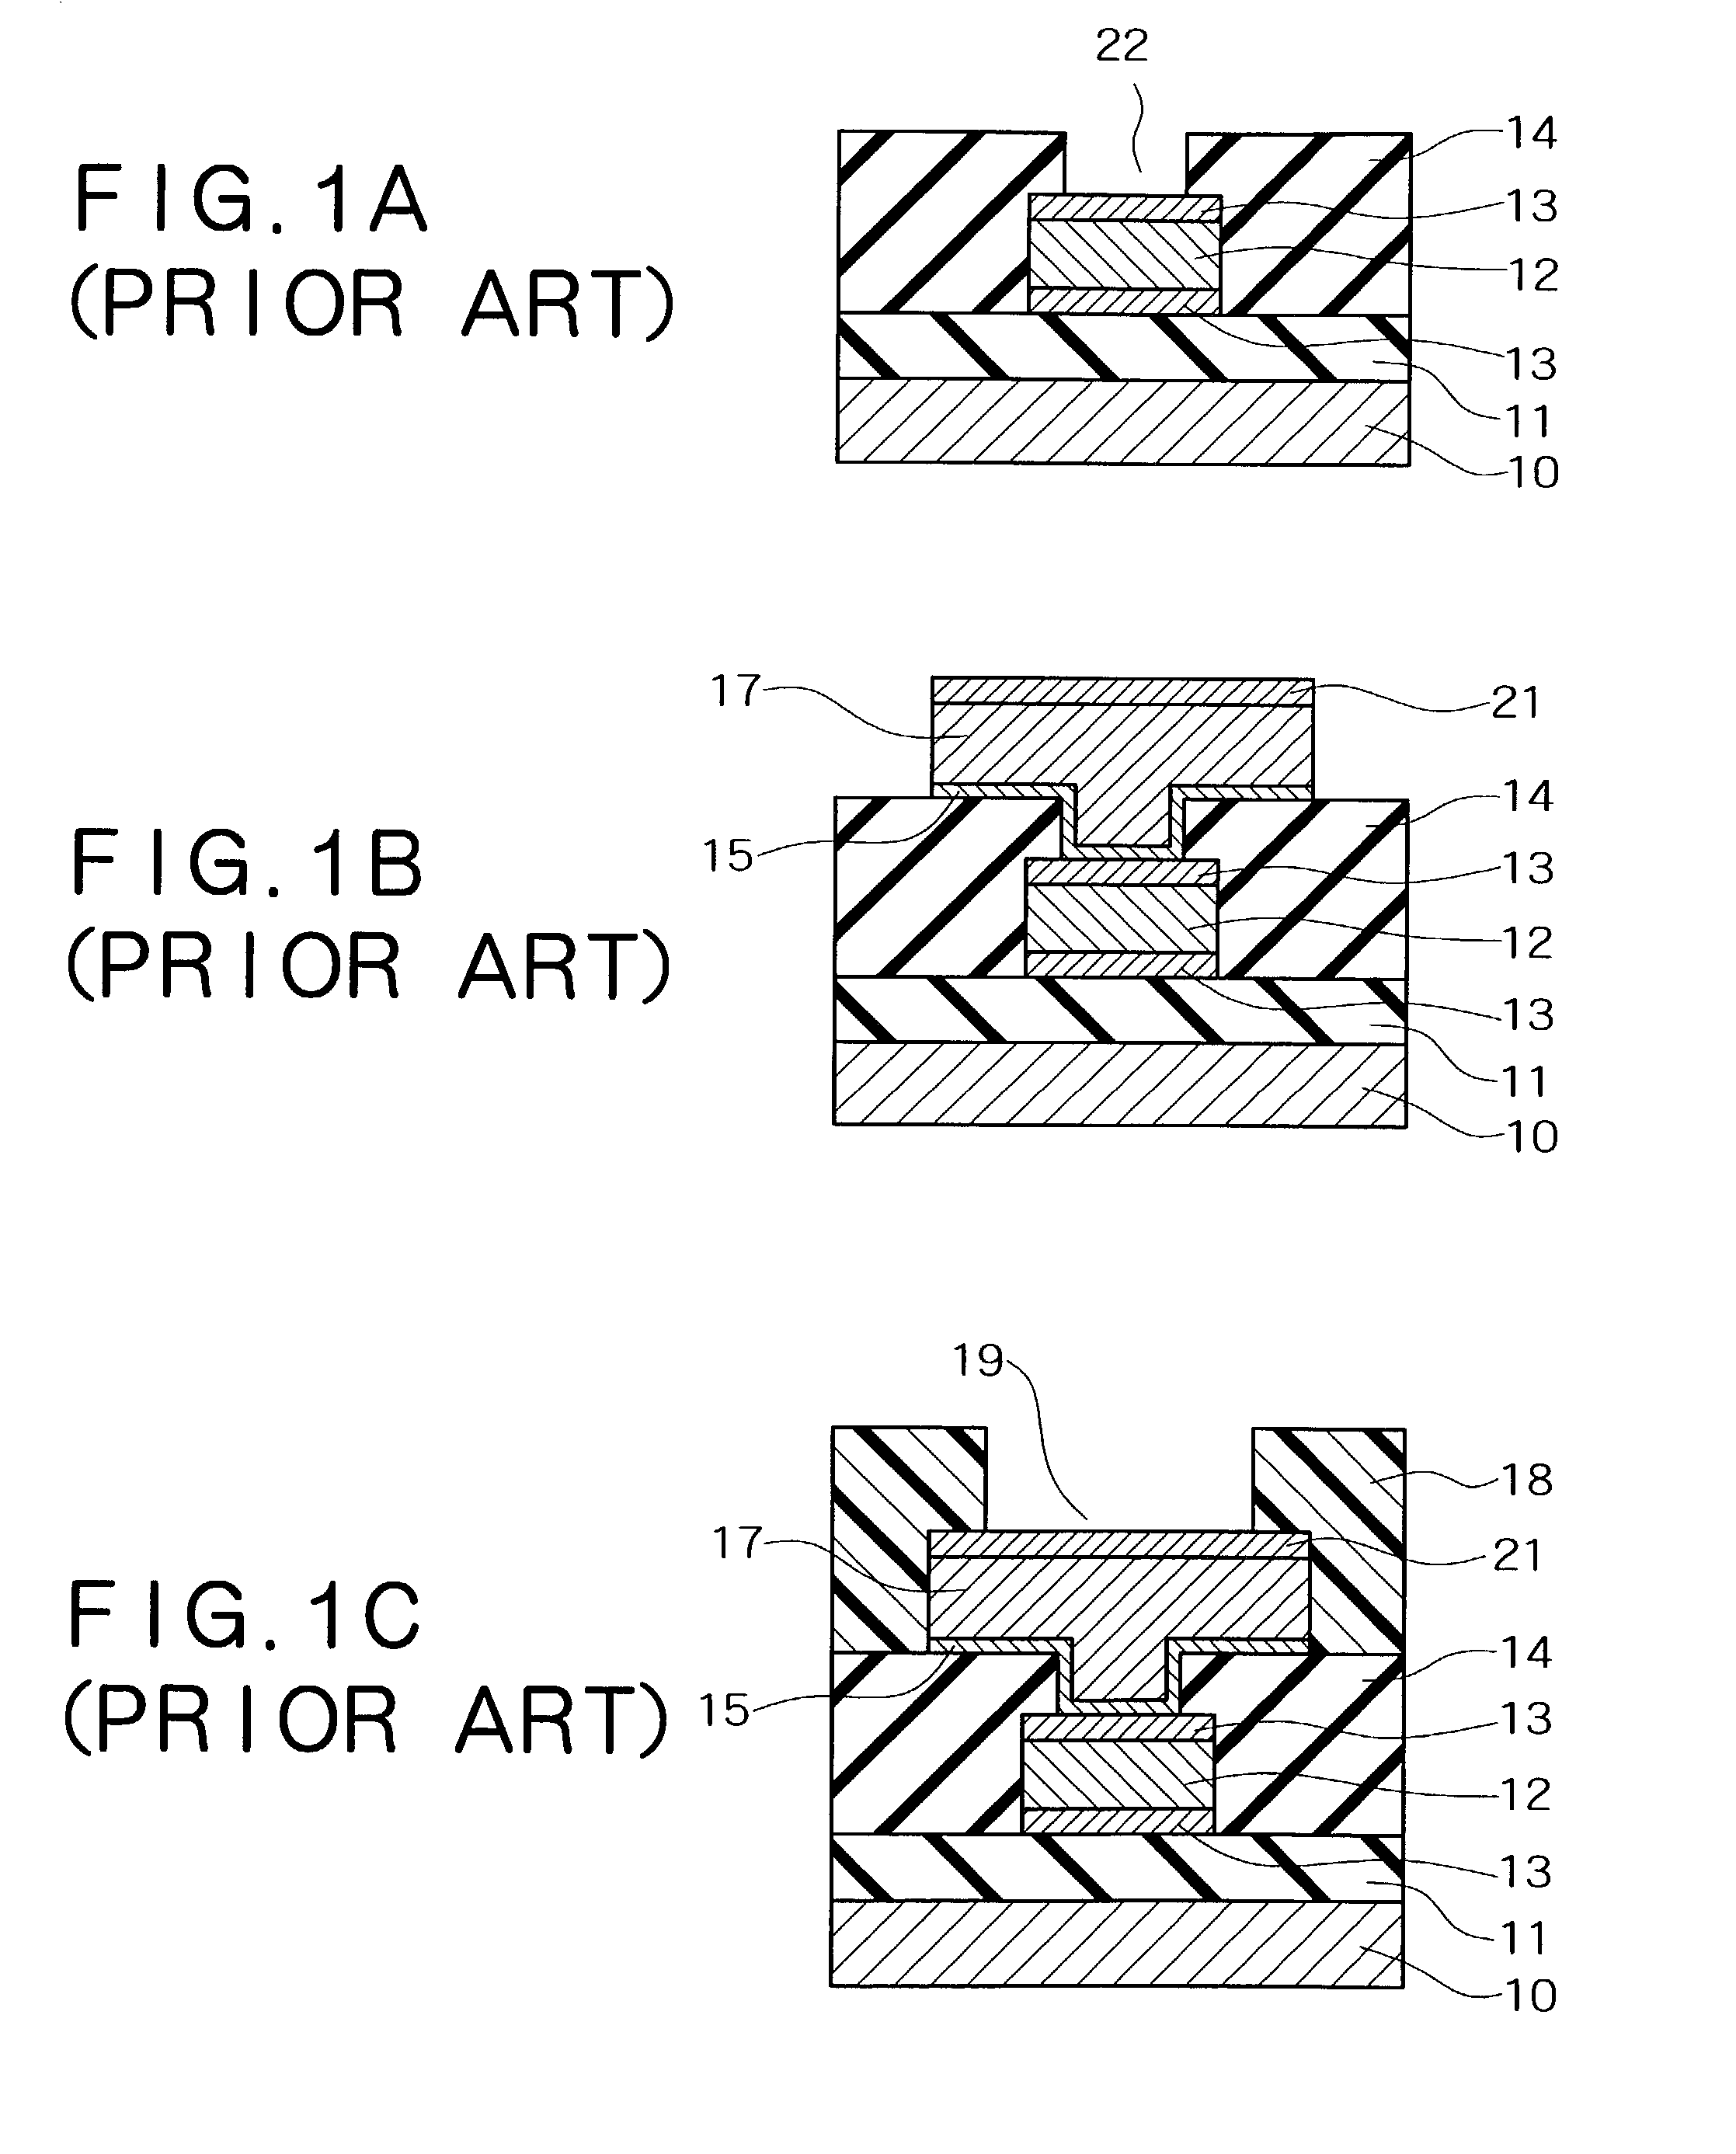 Semiconductor device having a roughened surface